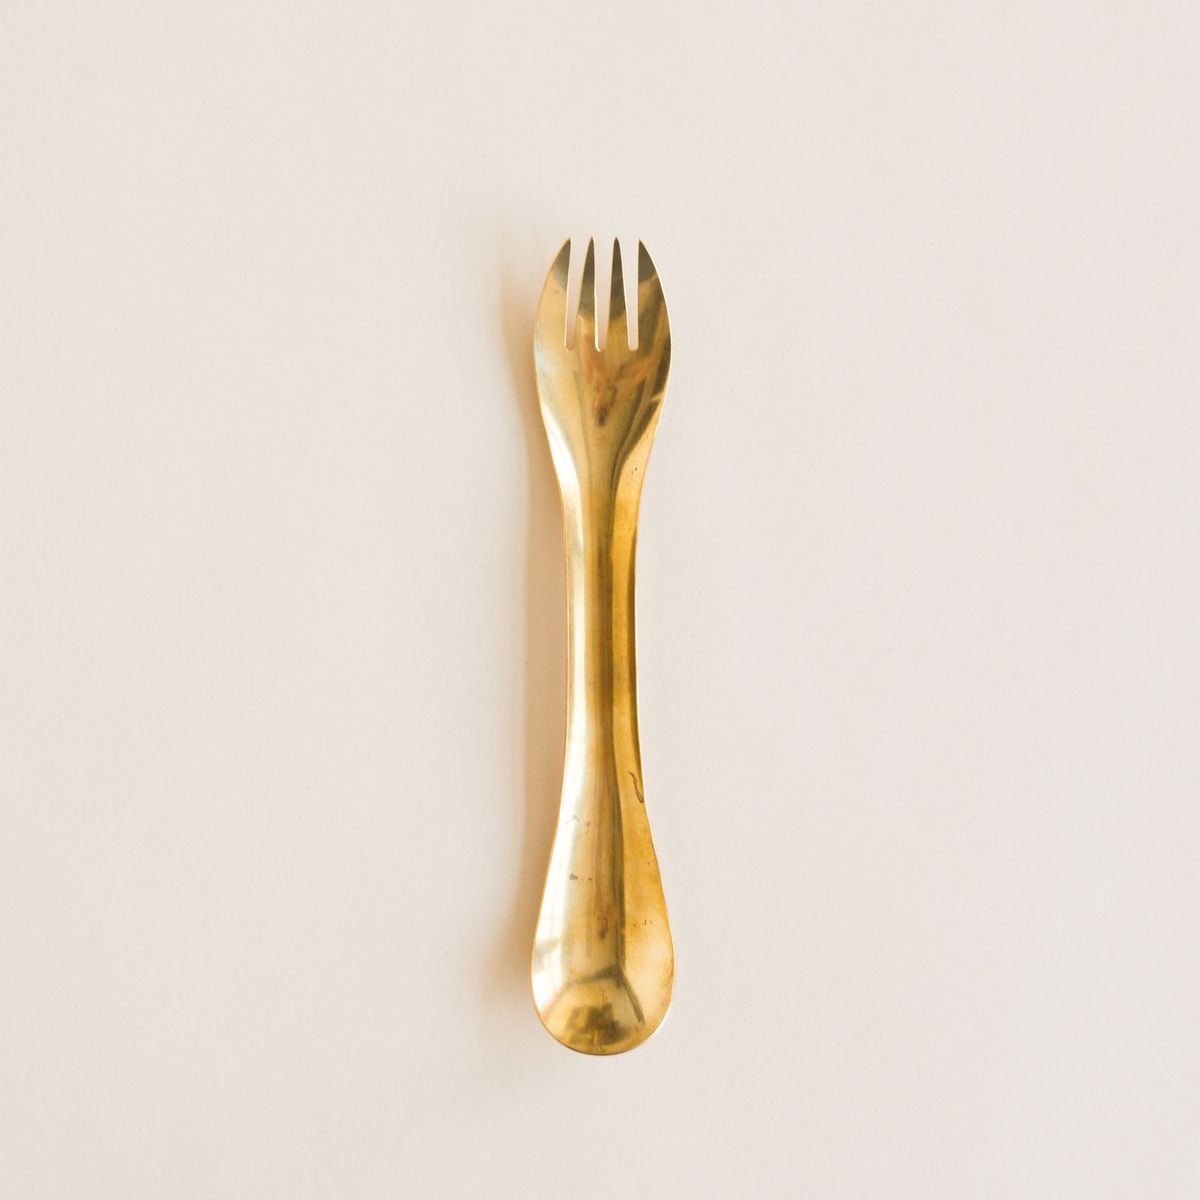 A brass spork: an eating utensil with spoon at one end and fork at the other